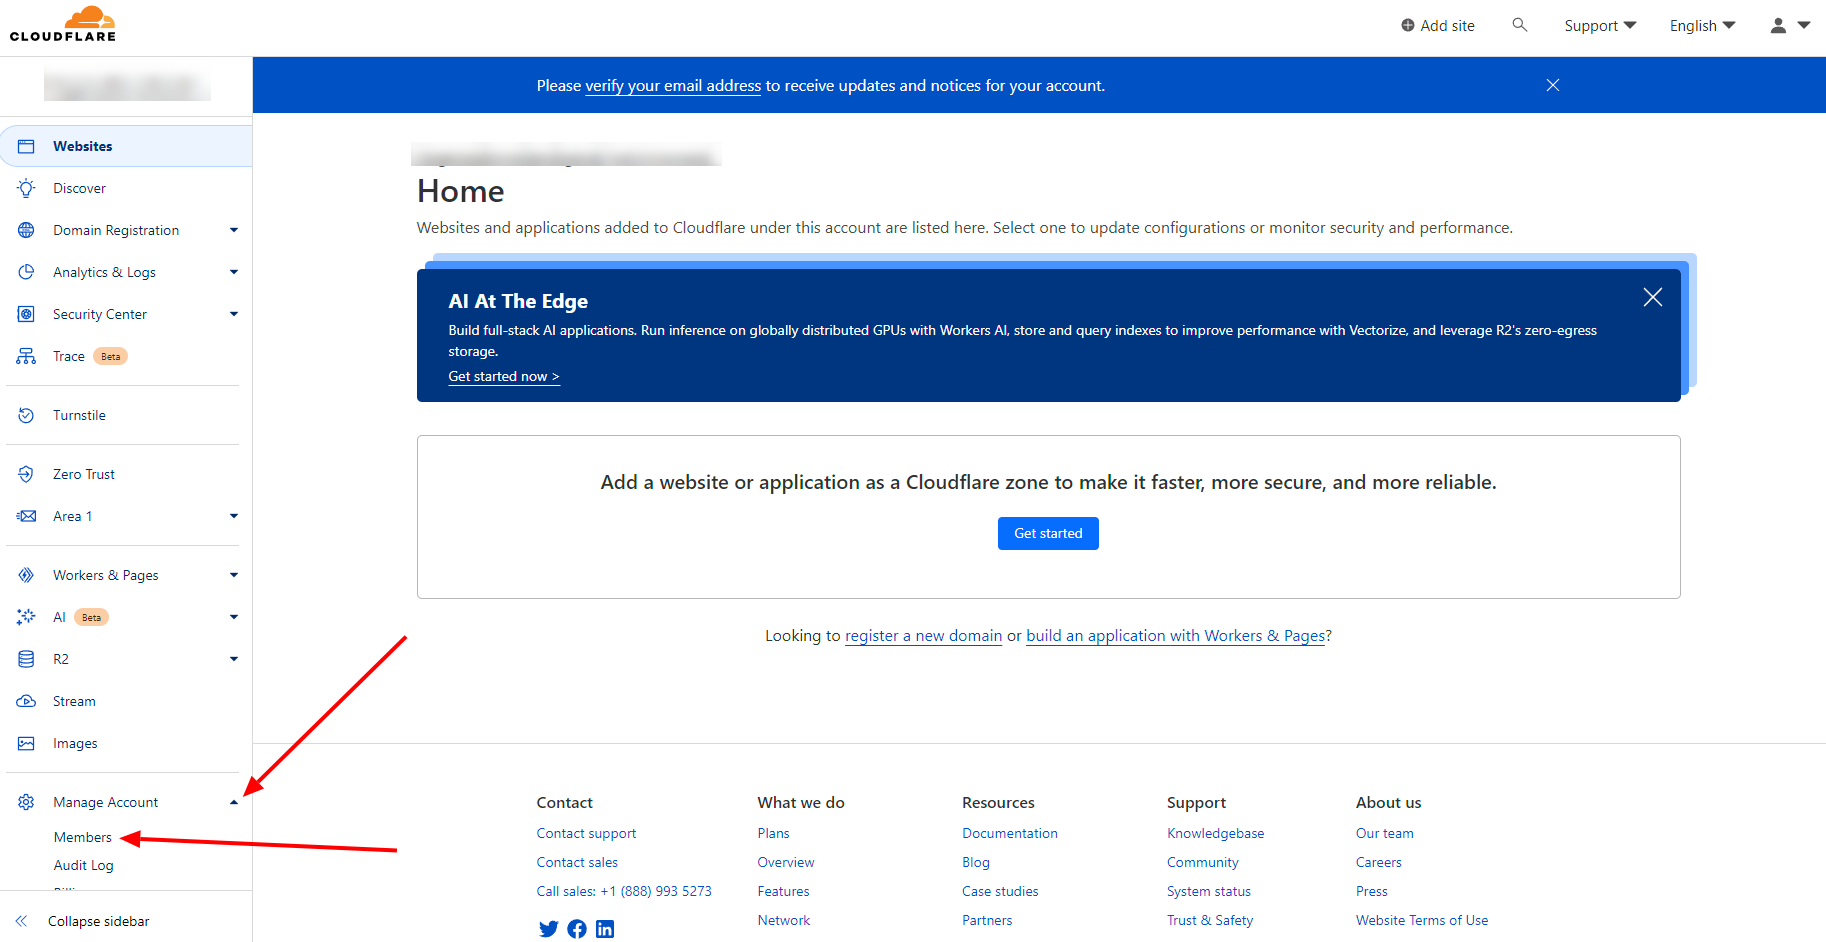 cloudflare account home